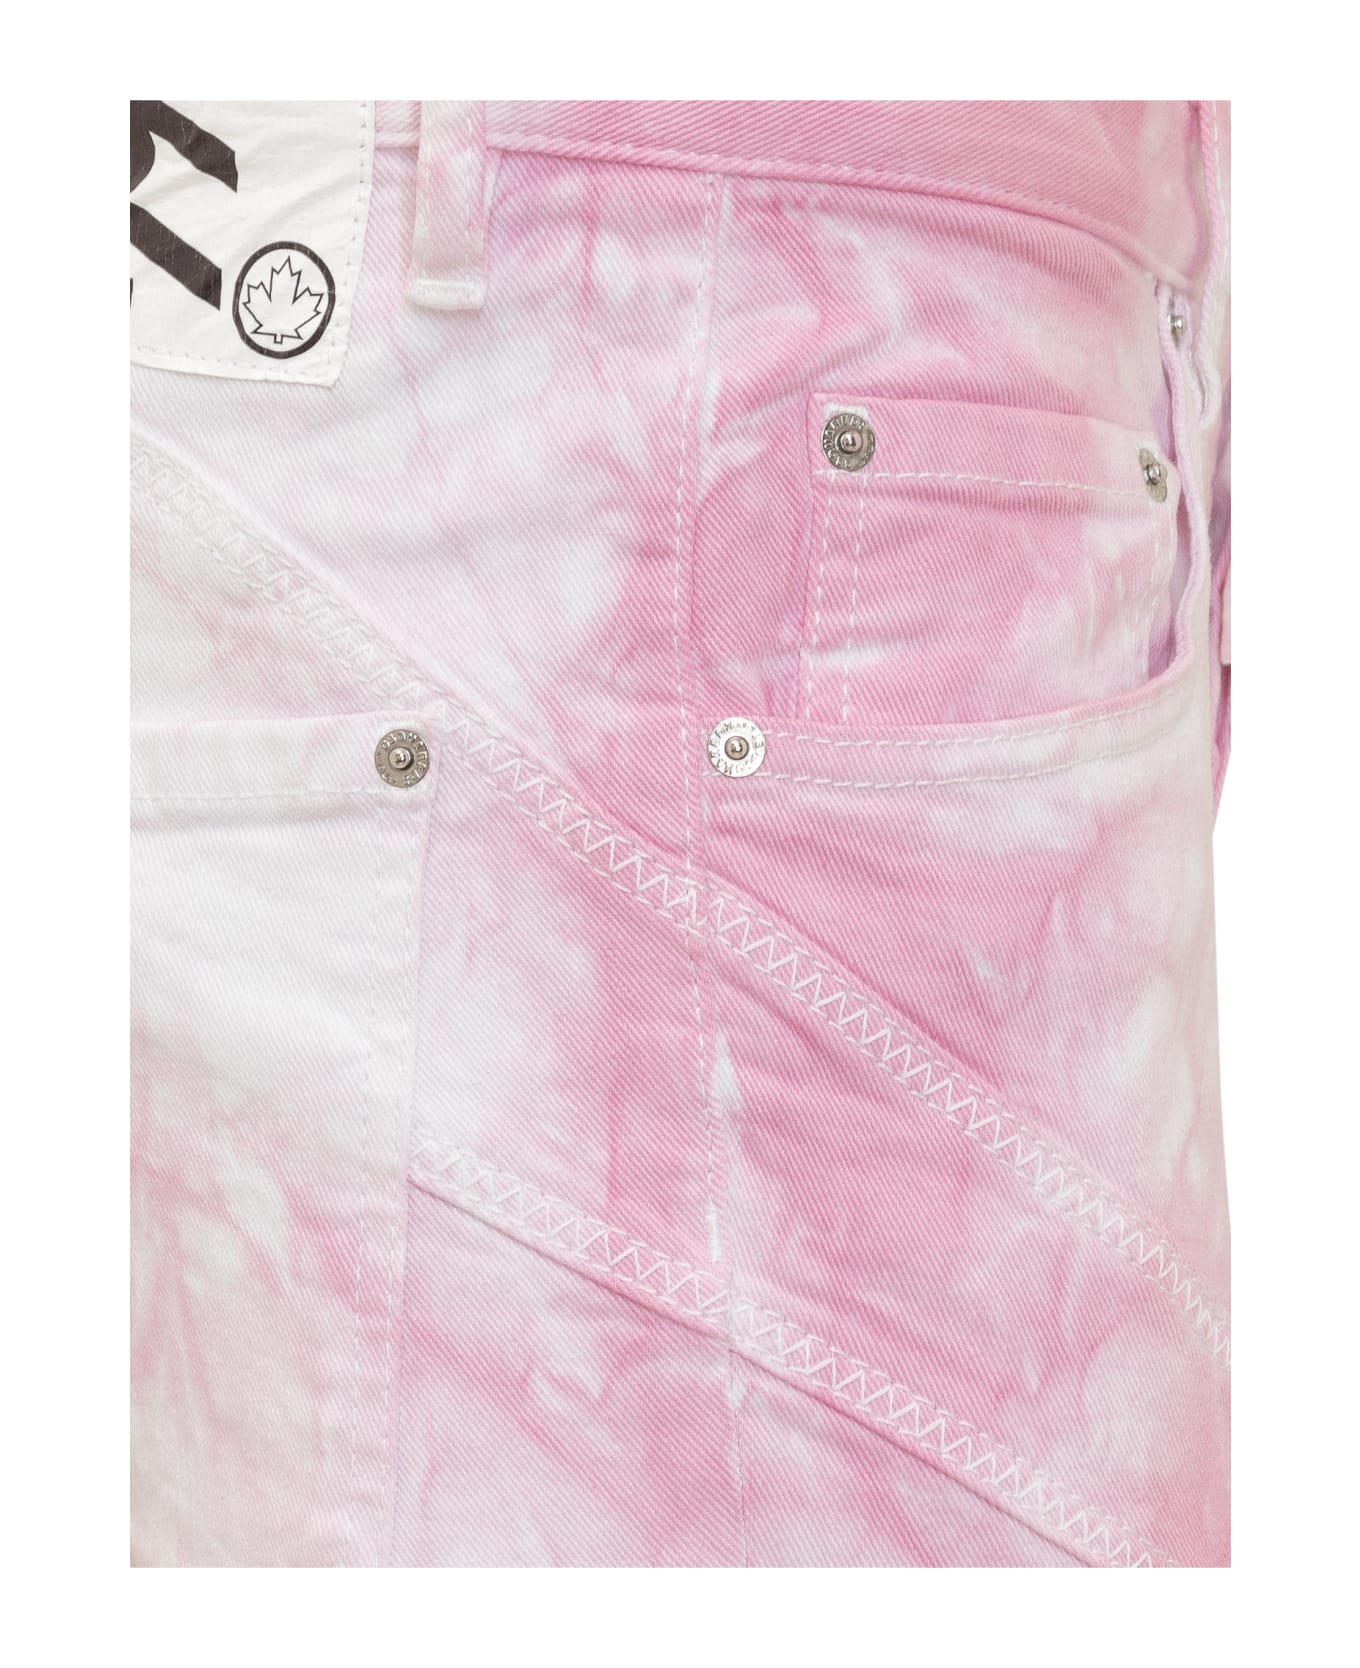 Dsquared2 Super Twinky Jeans - PINK